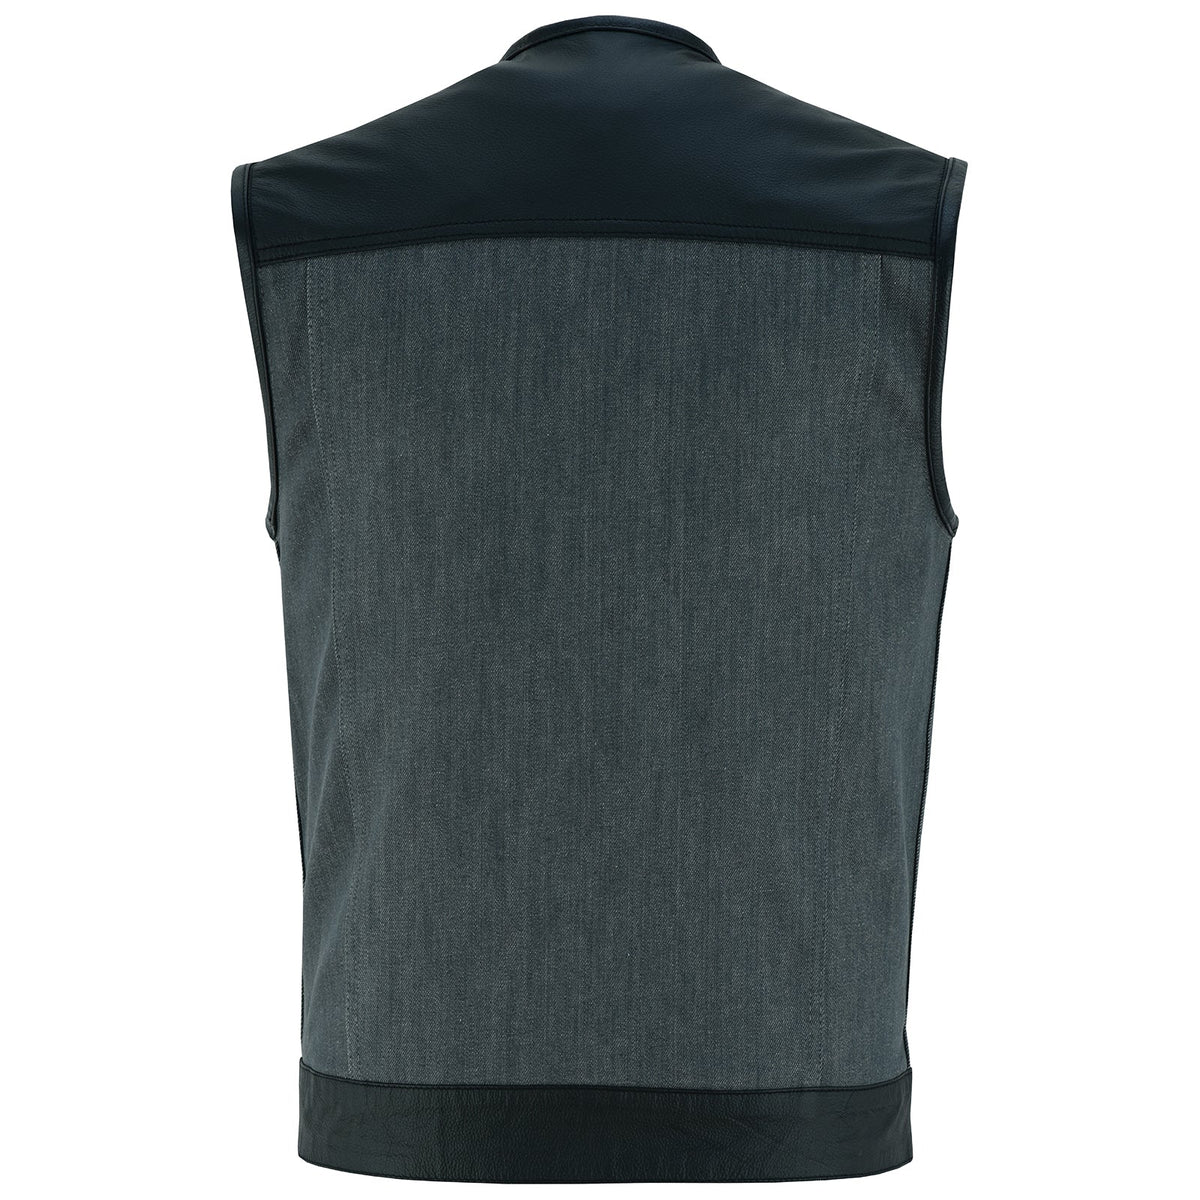 Men's Grey Denim & Leather Motorcycle Vest with CCW Pockets